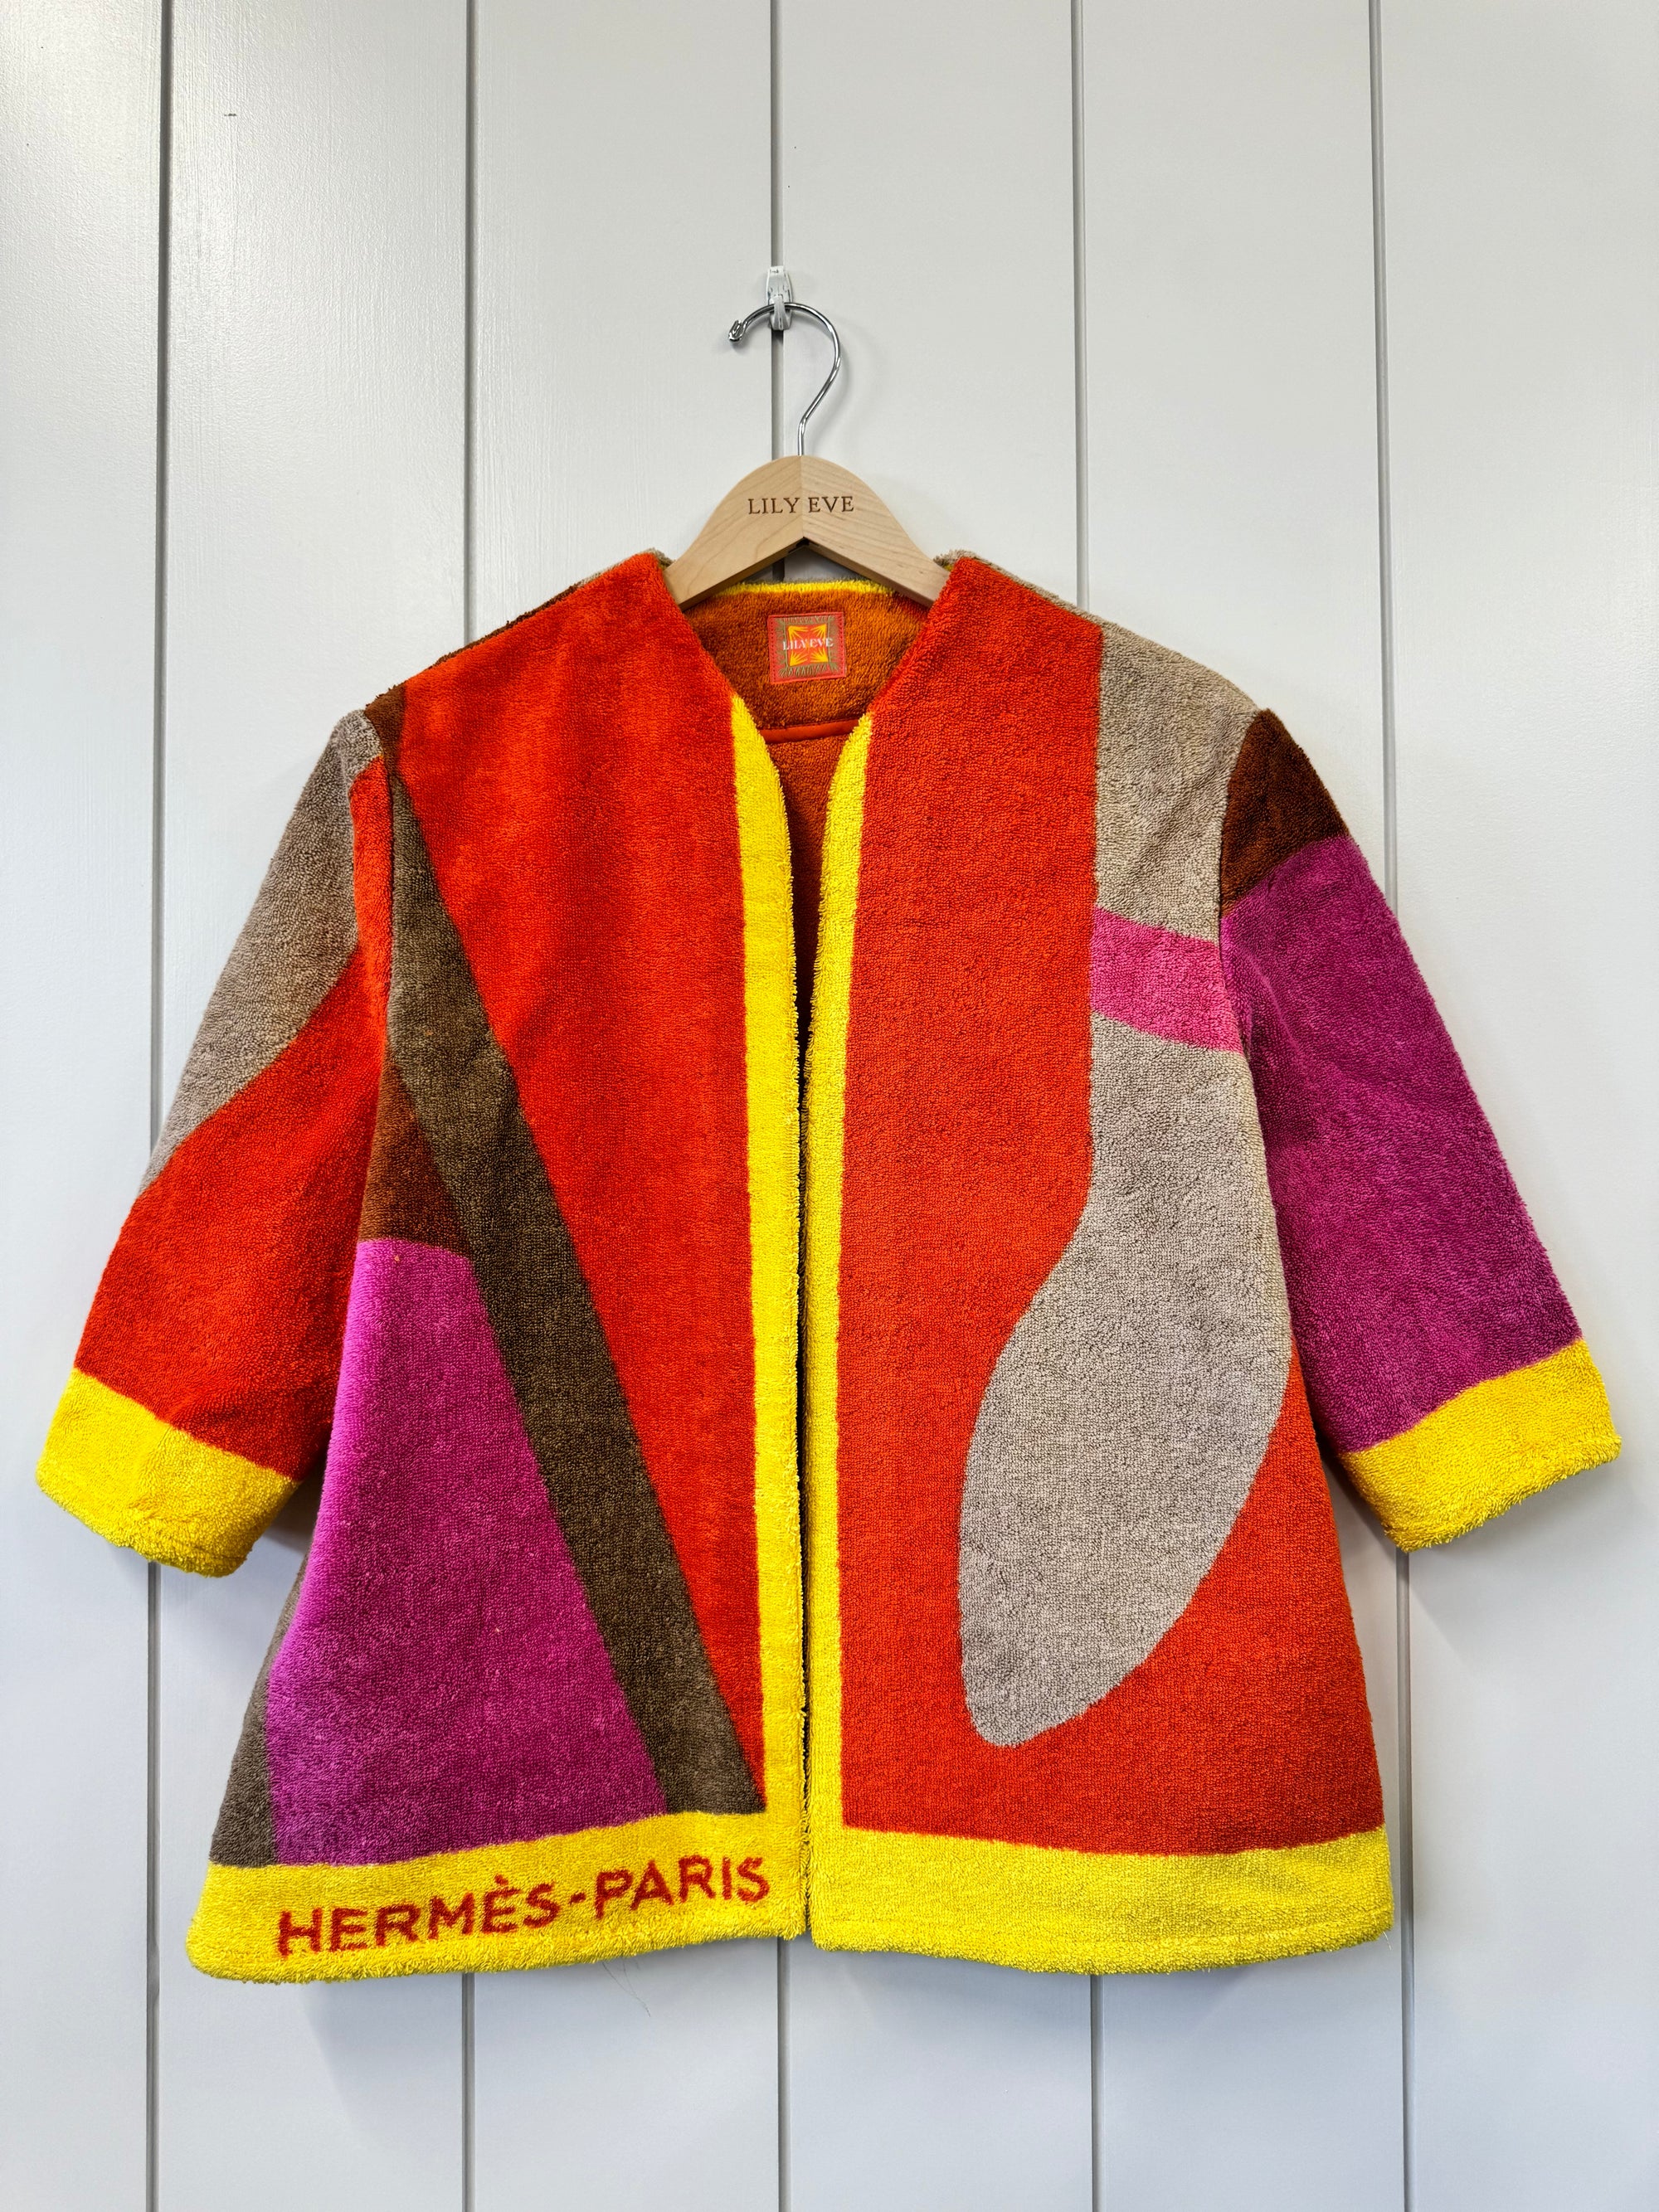 The Red Horse Jacket